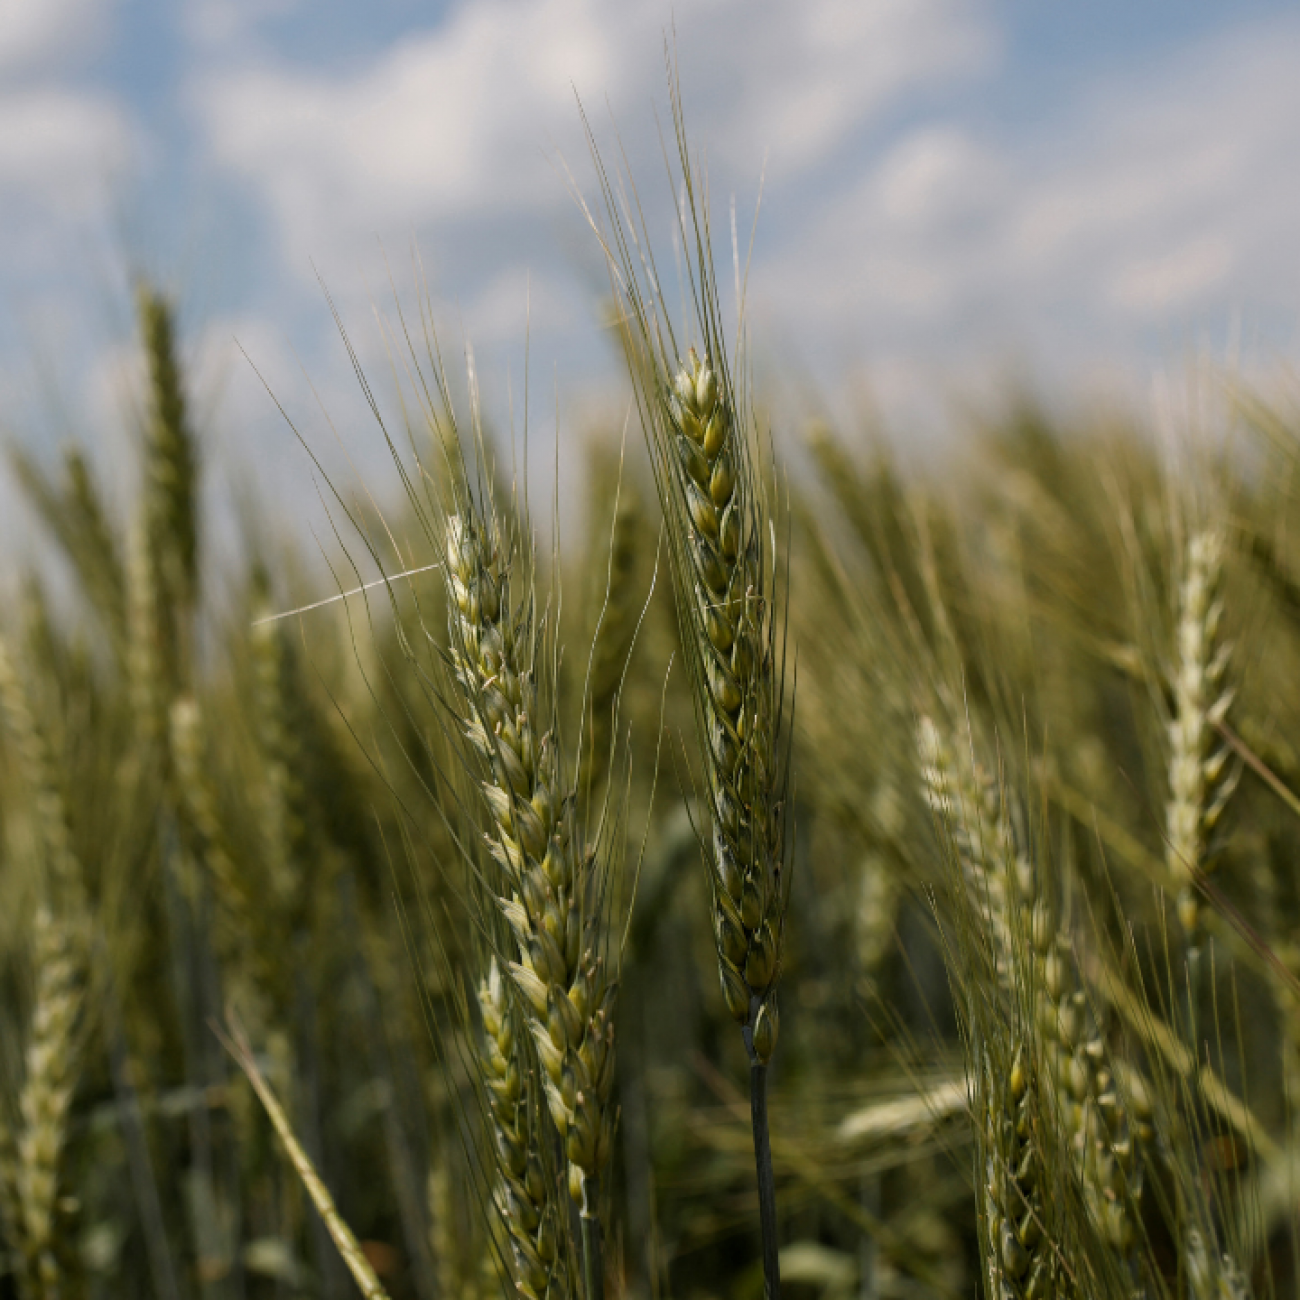 A close up image of a field of winter wheat growing outside Bashtanka, in the Mykolaiv region of Ukraine, on June 9, 2022